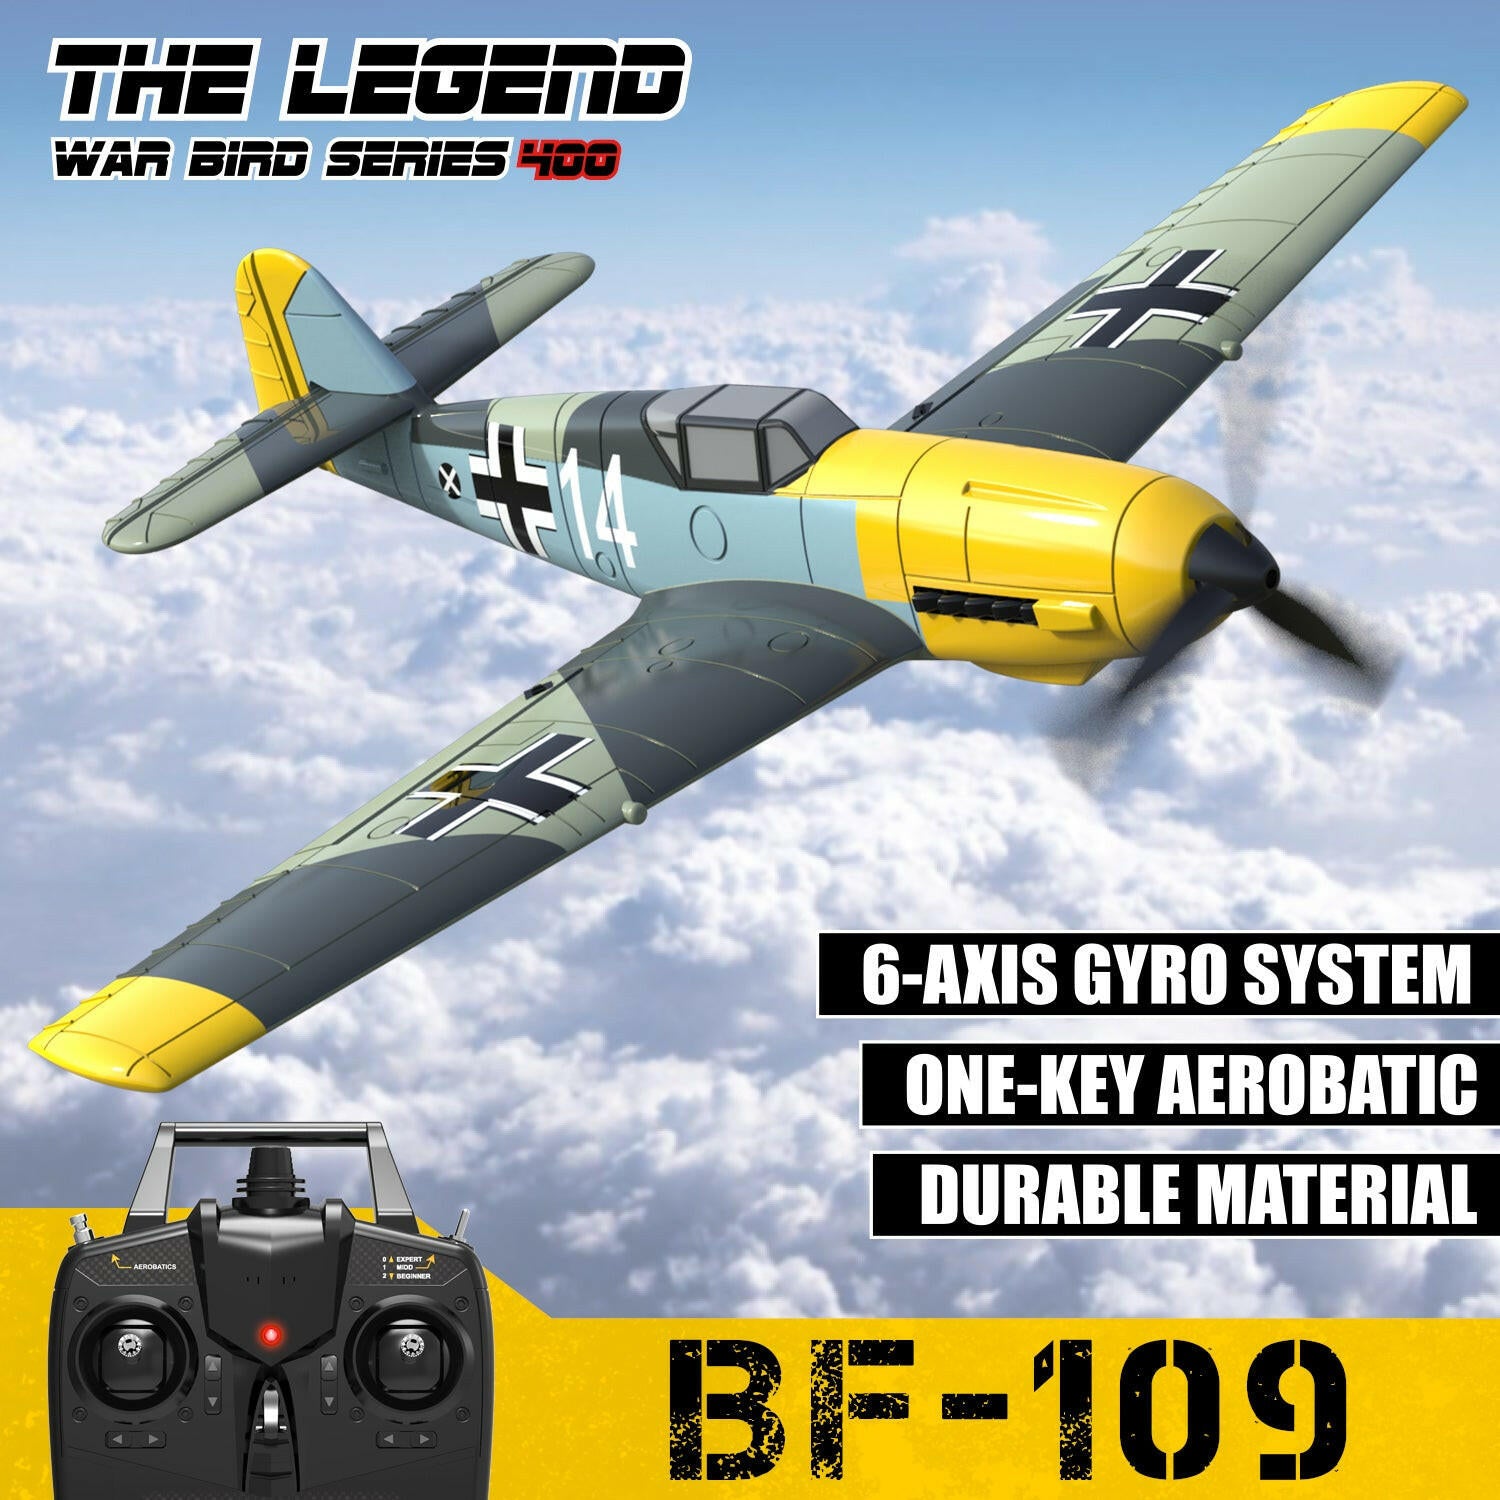 VOLANTEXRC BF 109 4-CH Remote Control Airplane Ready to Fly for Beginners with Xpilot Stabilization System(761-11) RTF - EXHOBBY